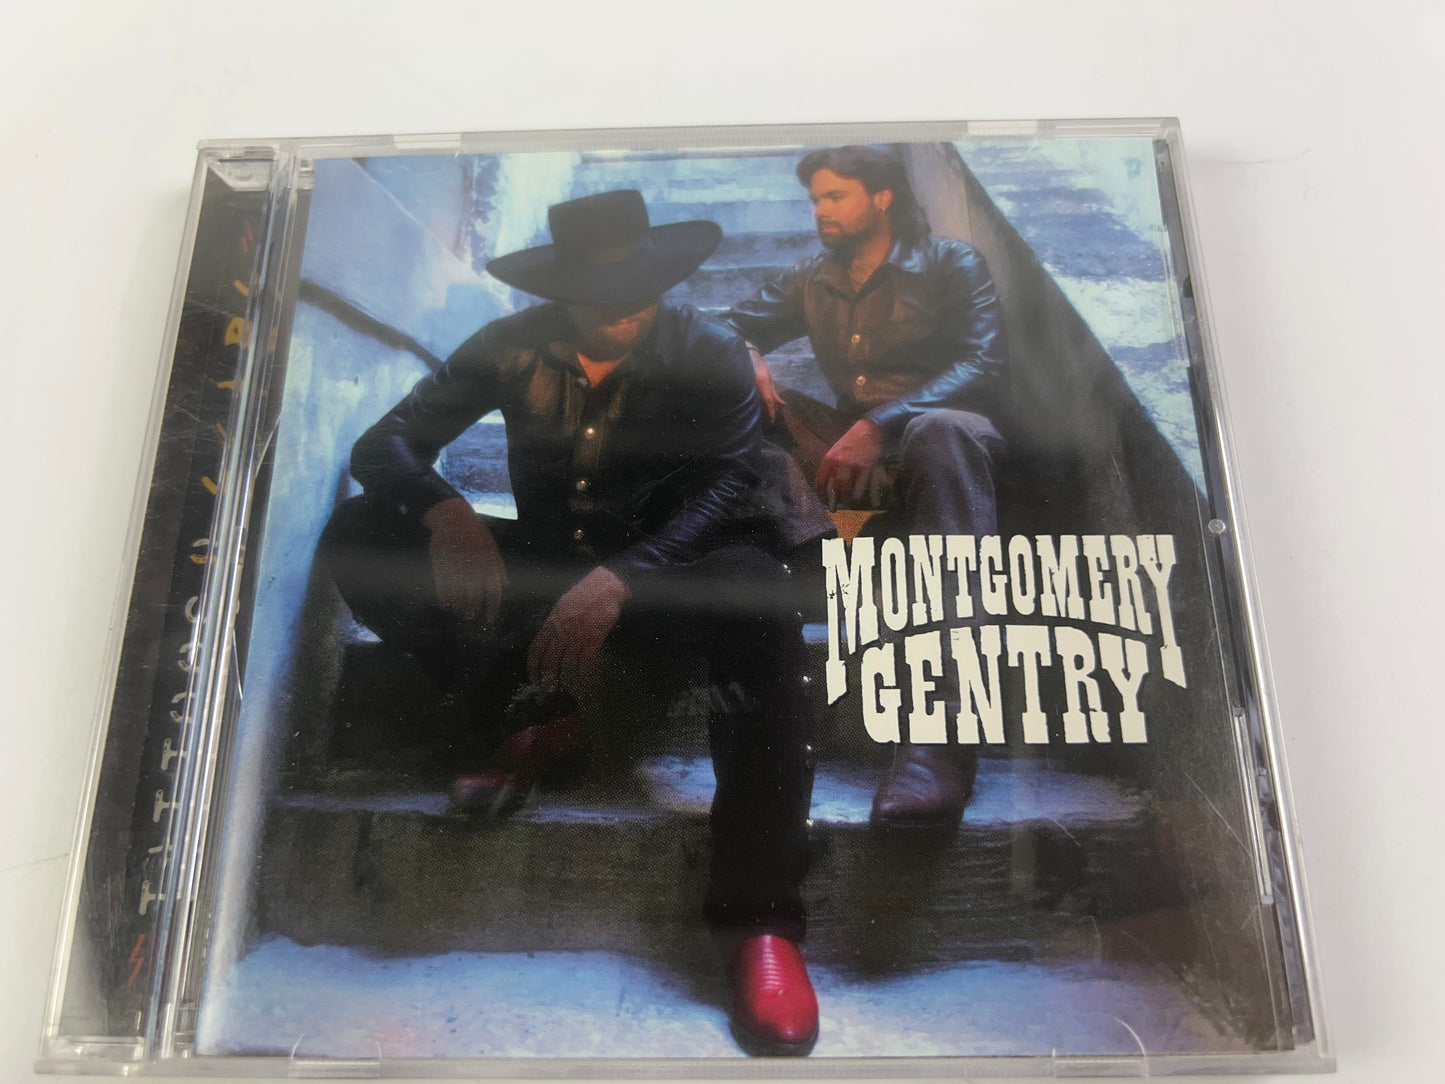 Tattoos & Scars - Audio CD By Montgomery Gentry